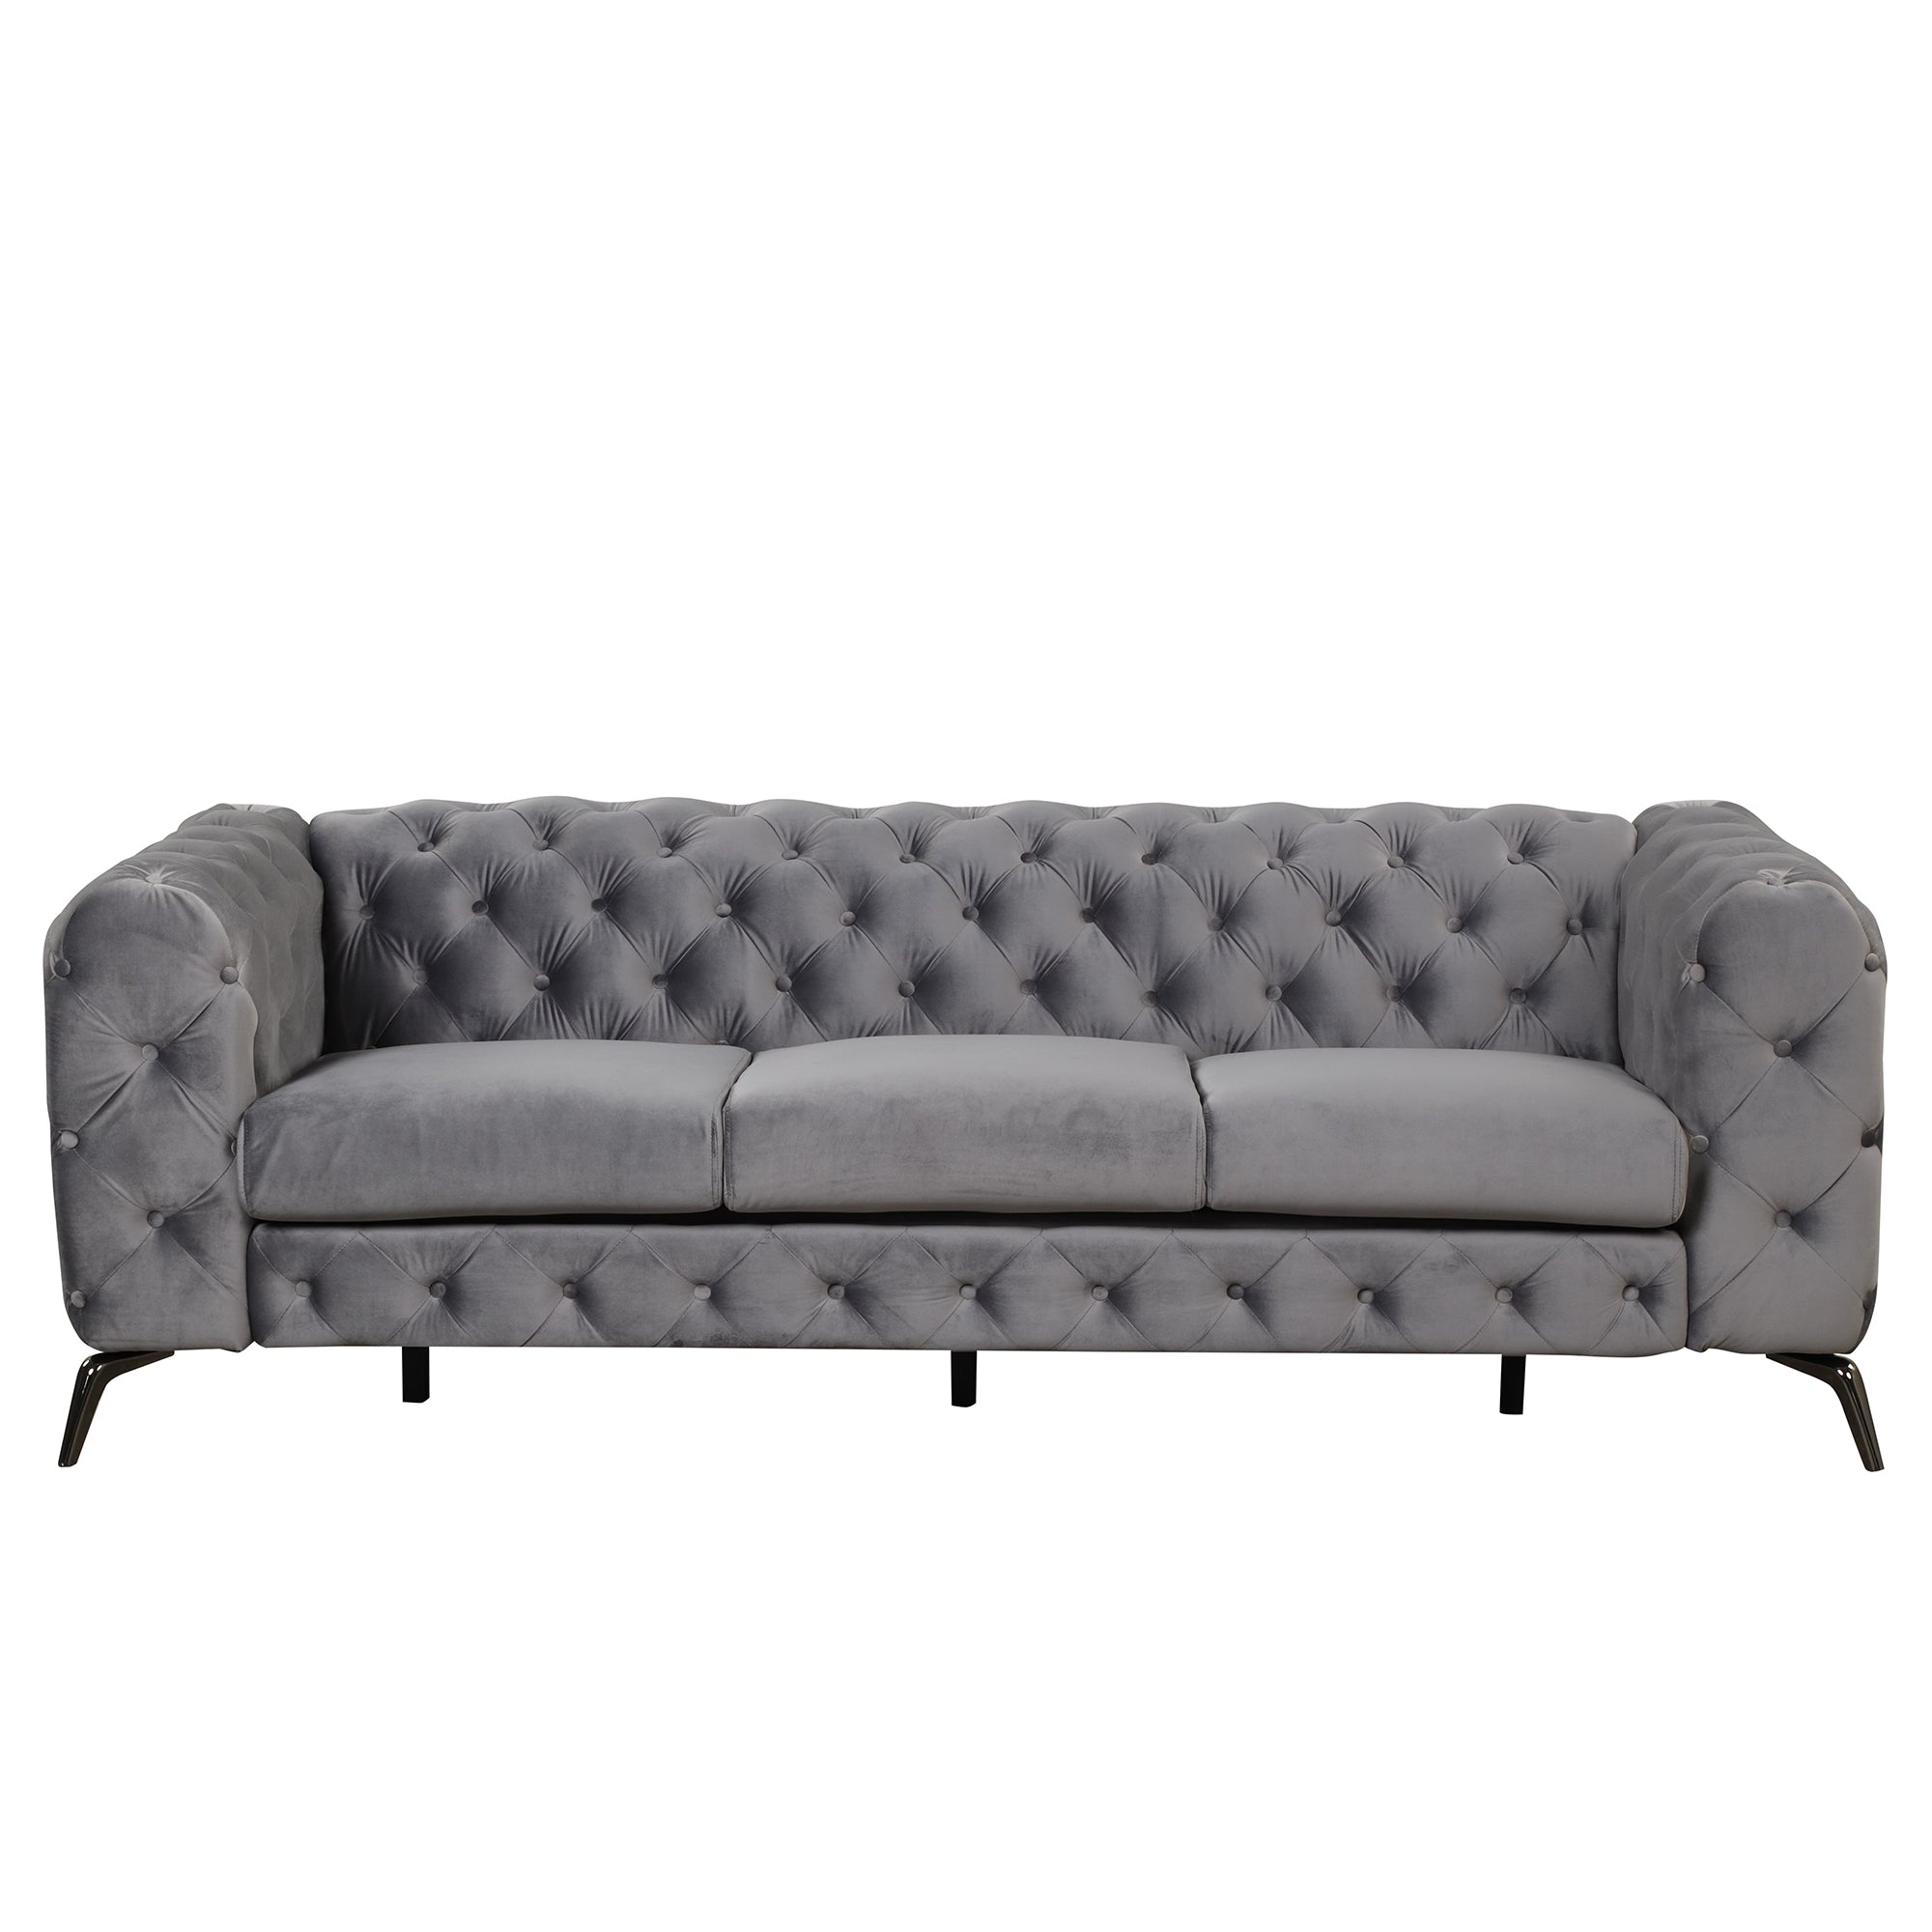 85.5" Velvet Upholstered Sofa with Sturdy Metal Legs,Modern Sofa Couch with Button Tufted Back, 3 Seater Sofa Couch for Living Room,Apartment,Home Office,Gray